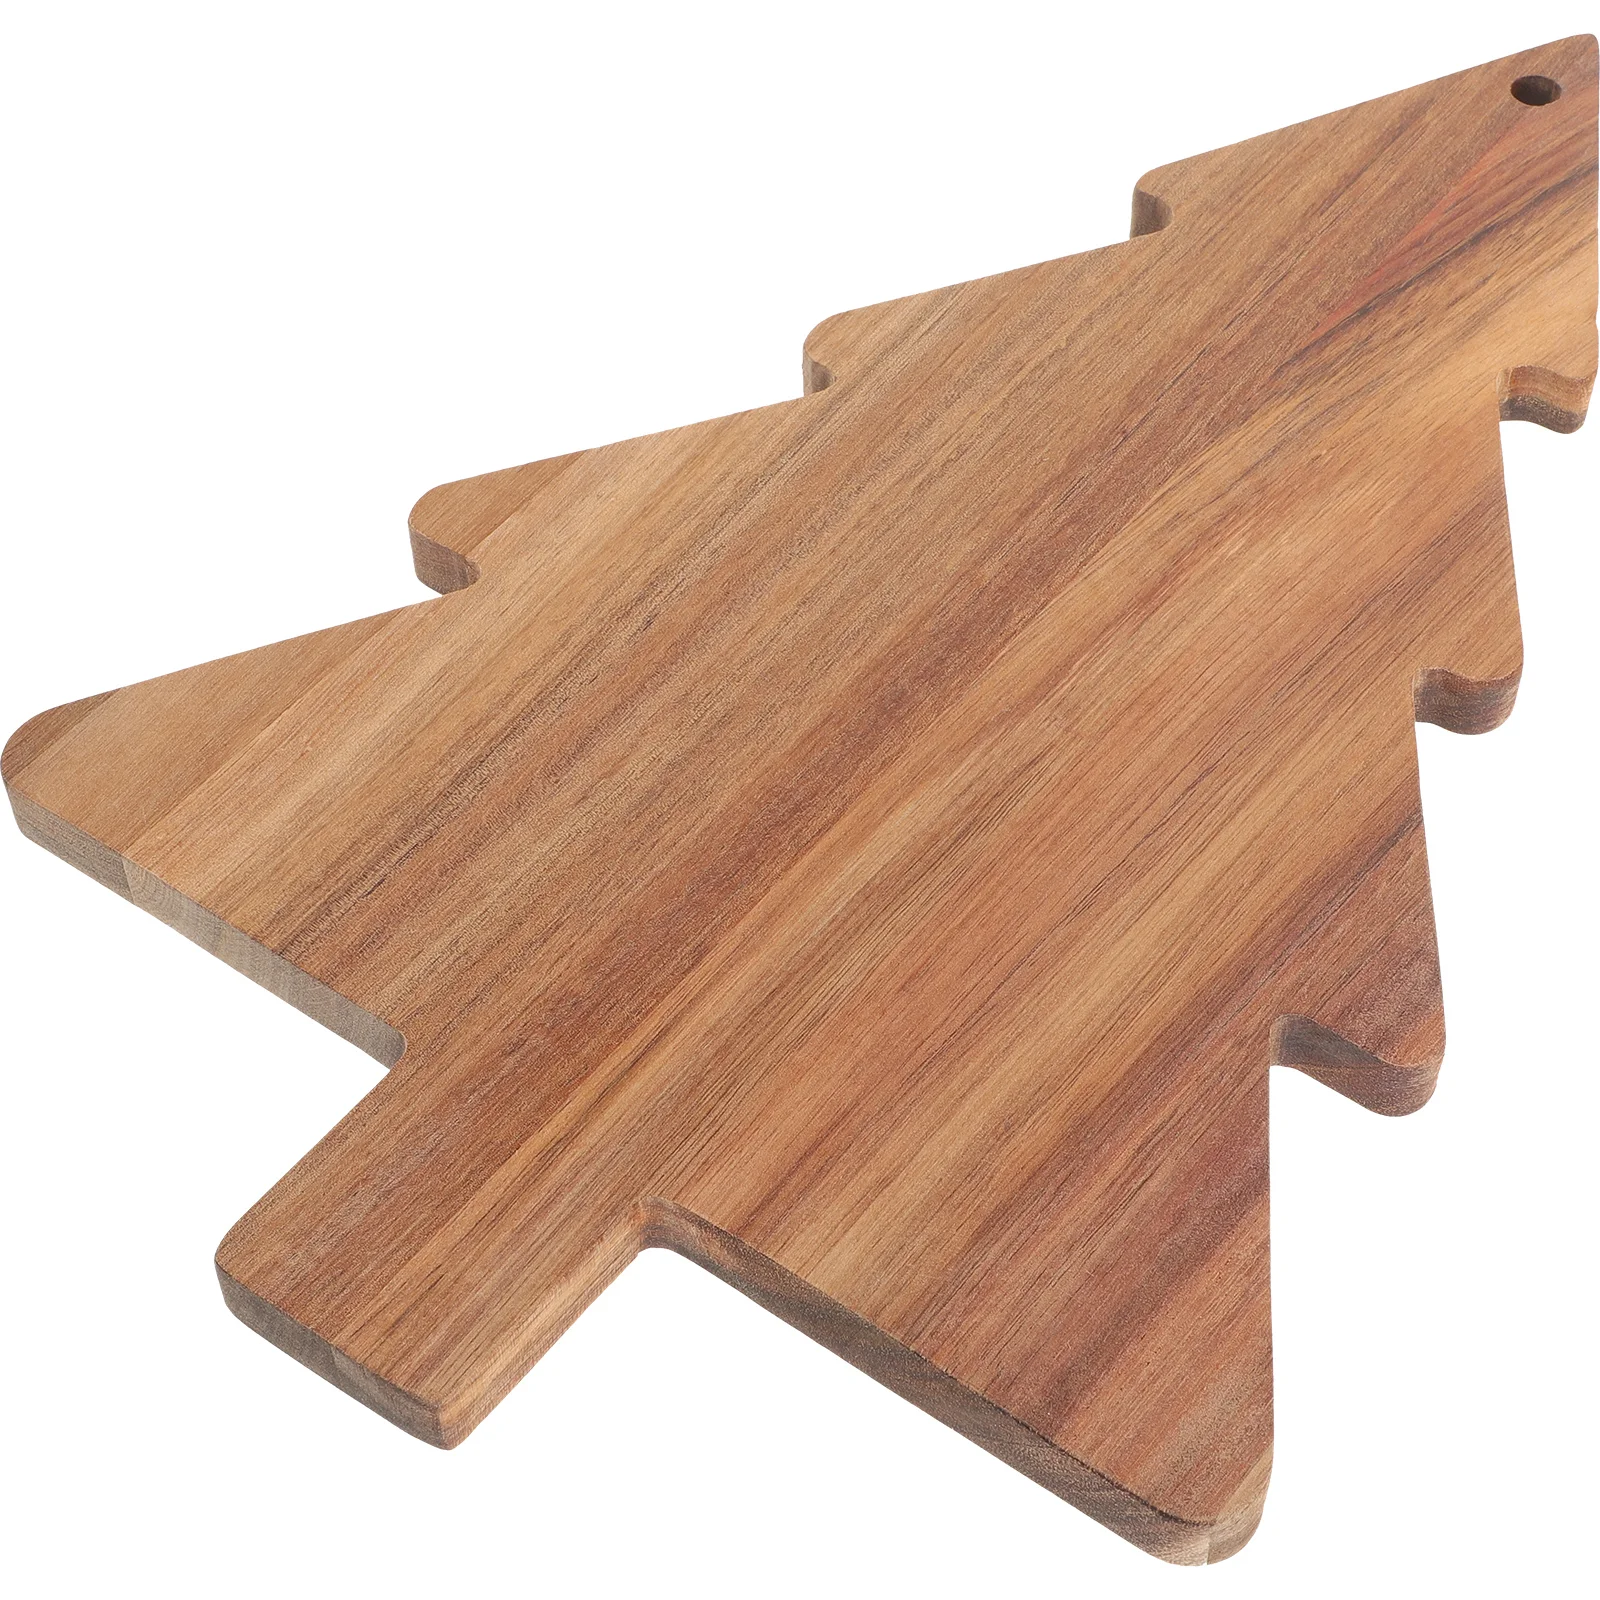 

Round Tray Christmas Tree Charcuterie Board Pizza Storage Kitchen Platter Butter Cutting Wooden Boards Fruit